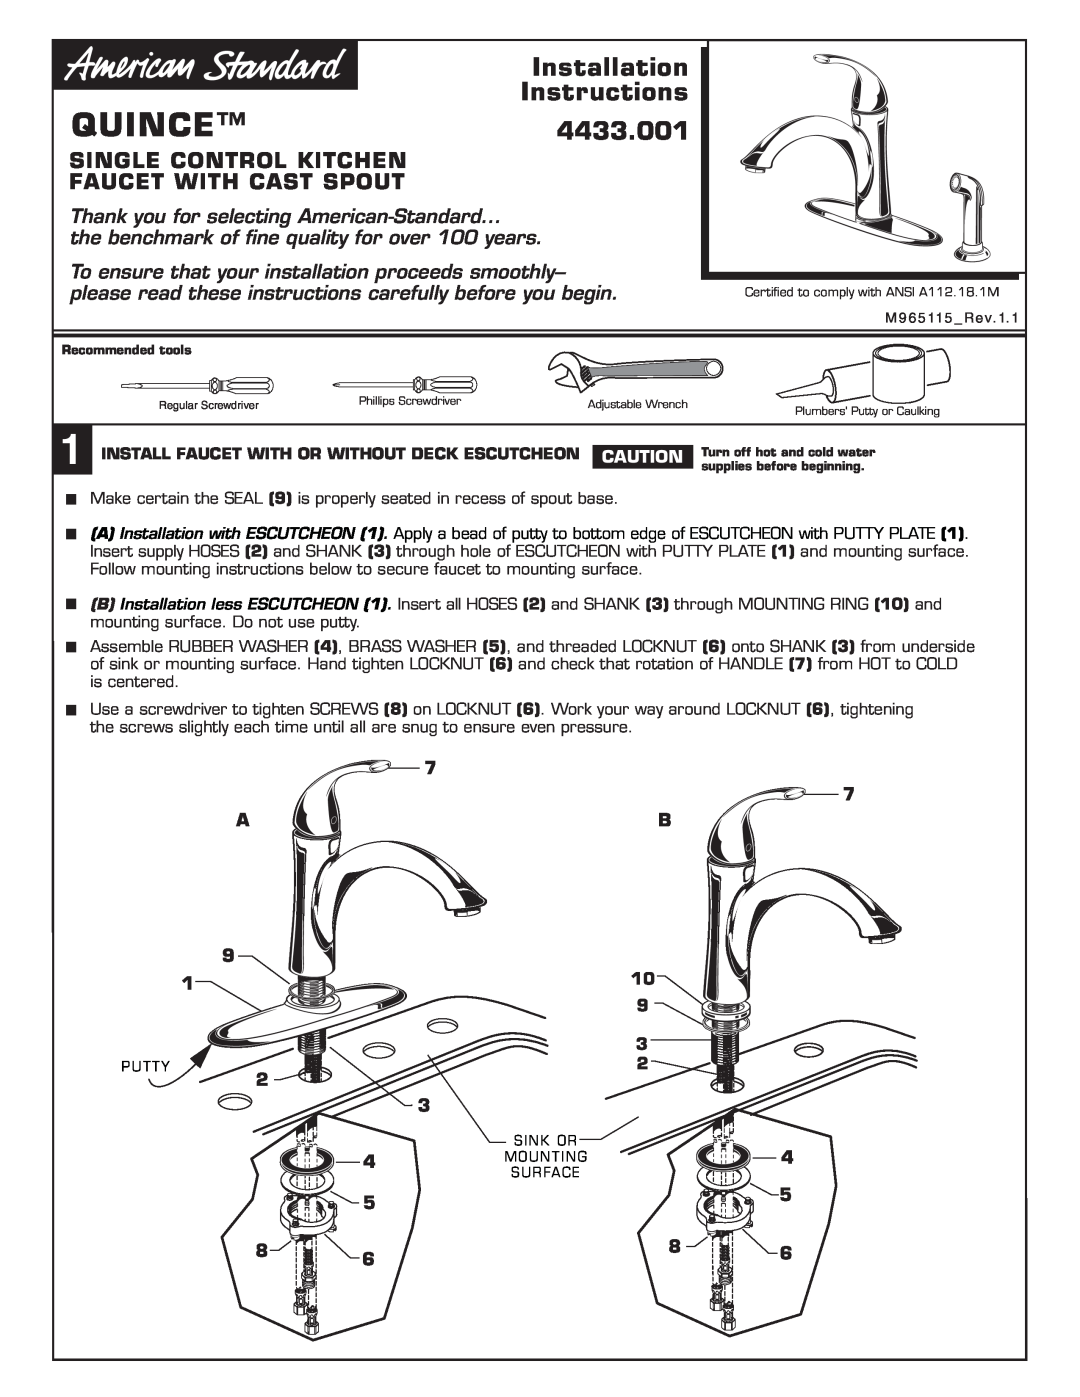 American Standard 4433.001 installation instructions Install Faucet With Or Without Deck Escutcheon Caution 